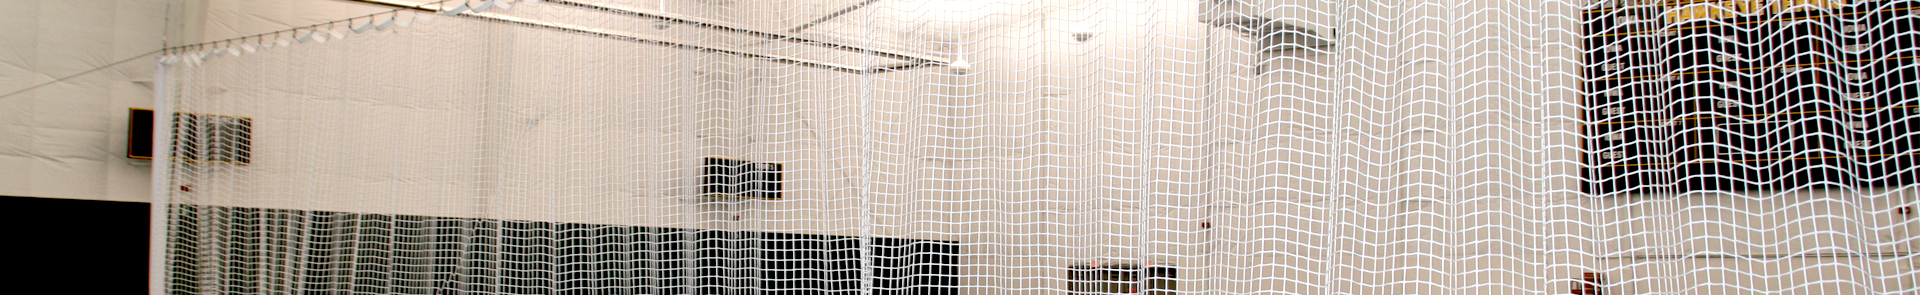 Protective Barrier Netting